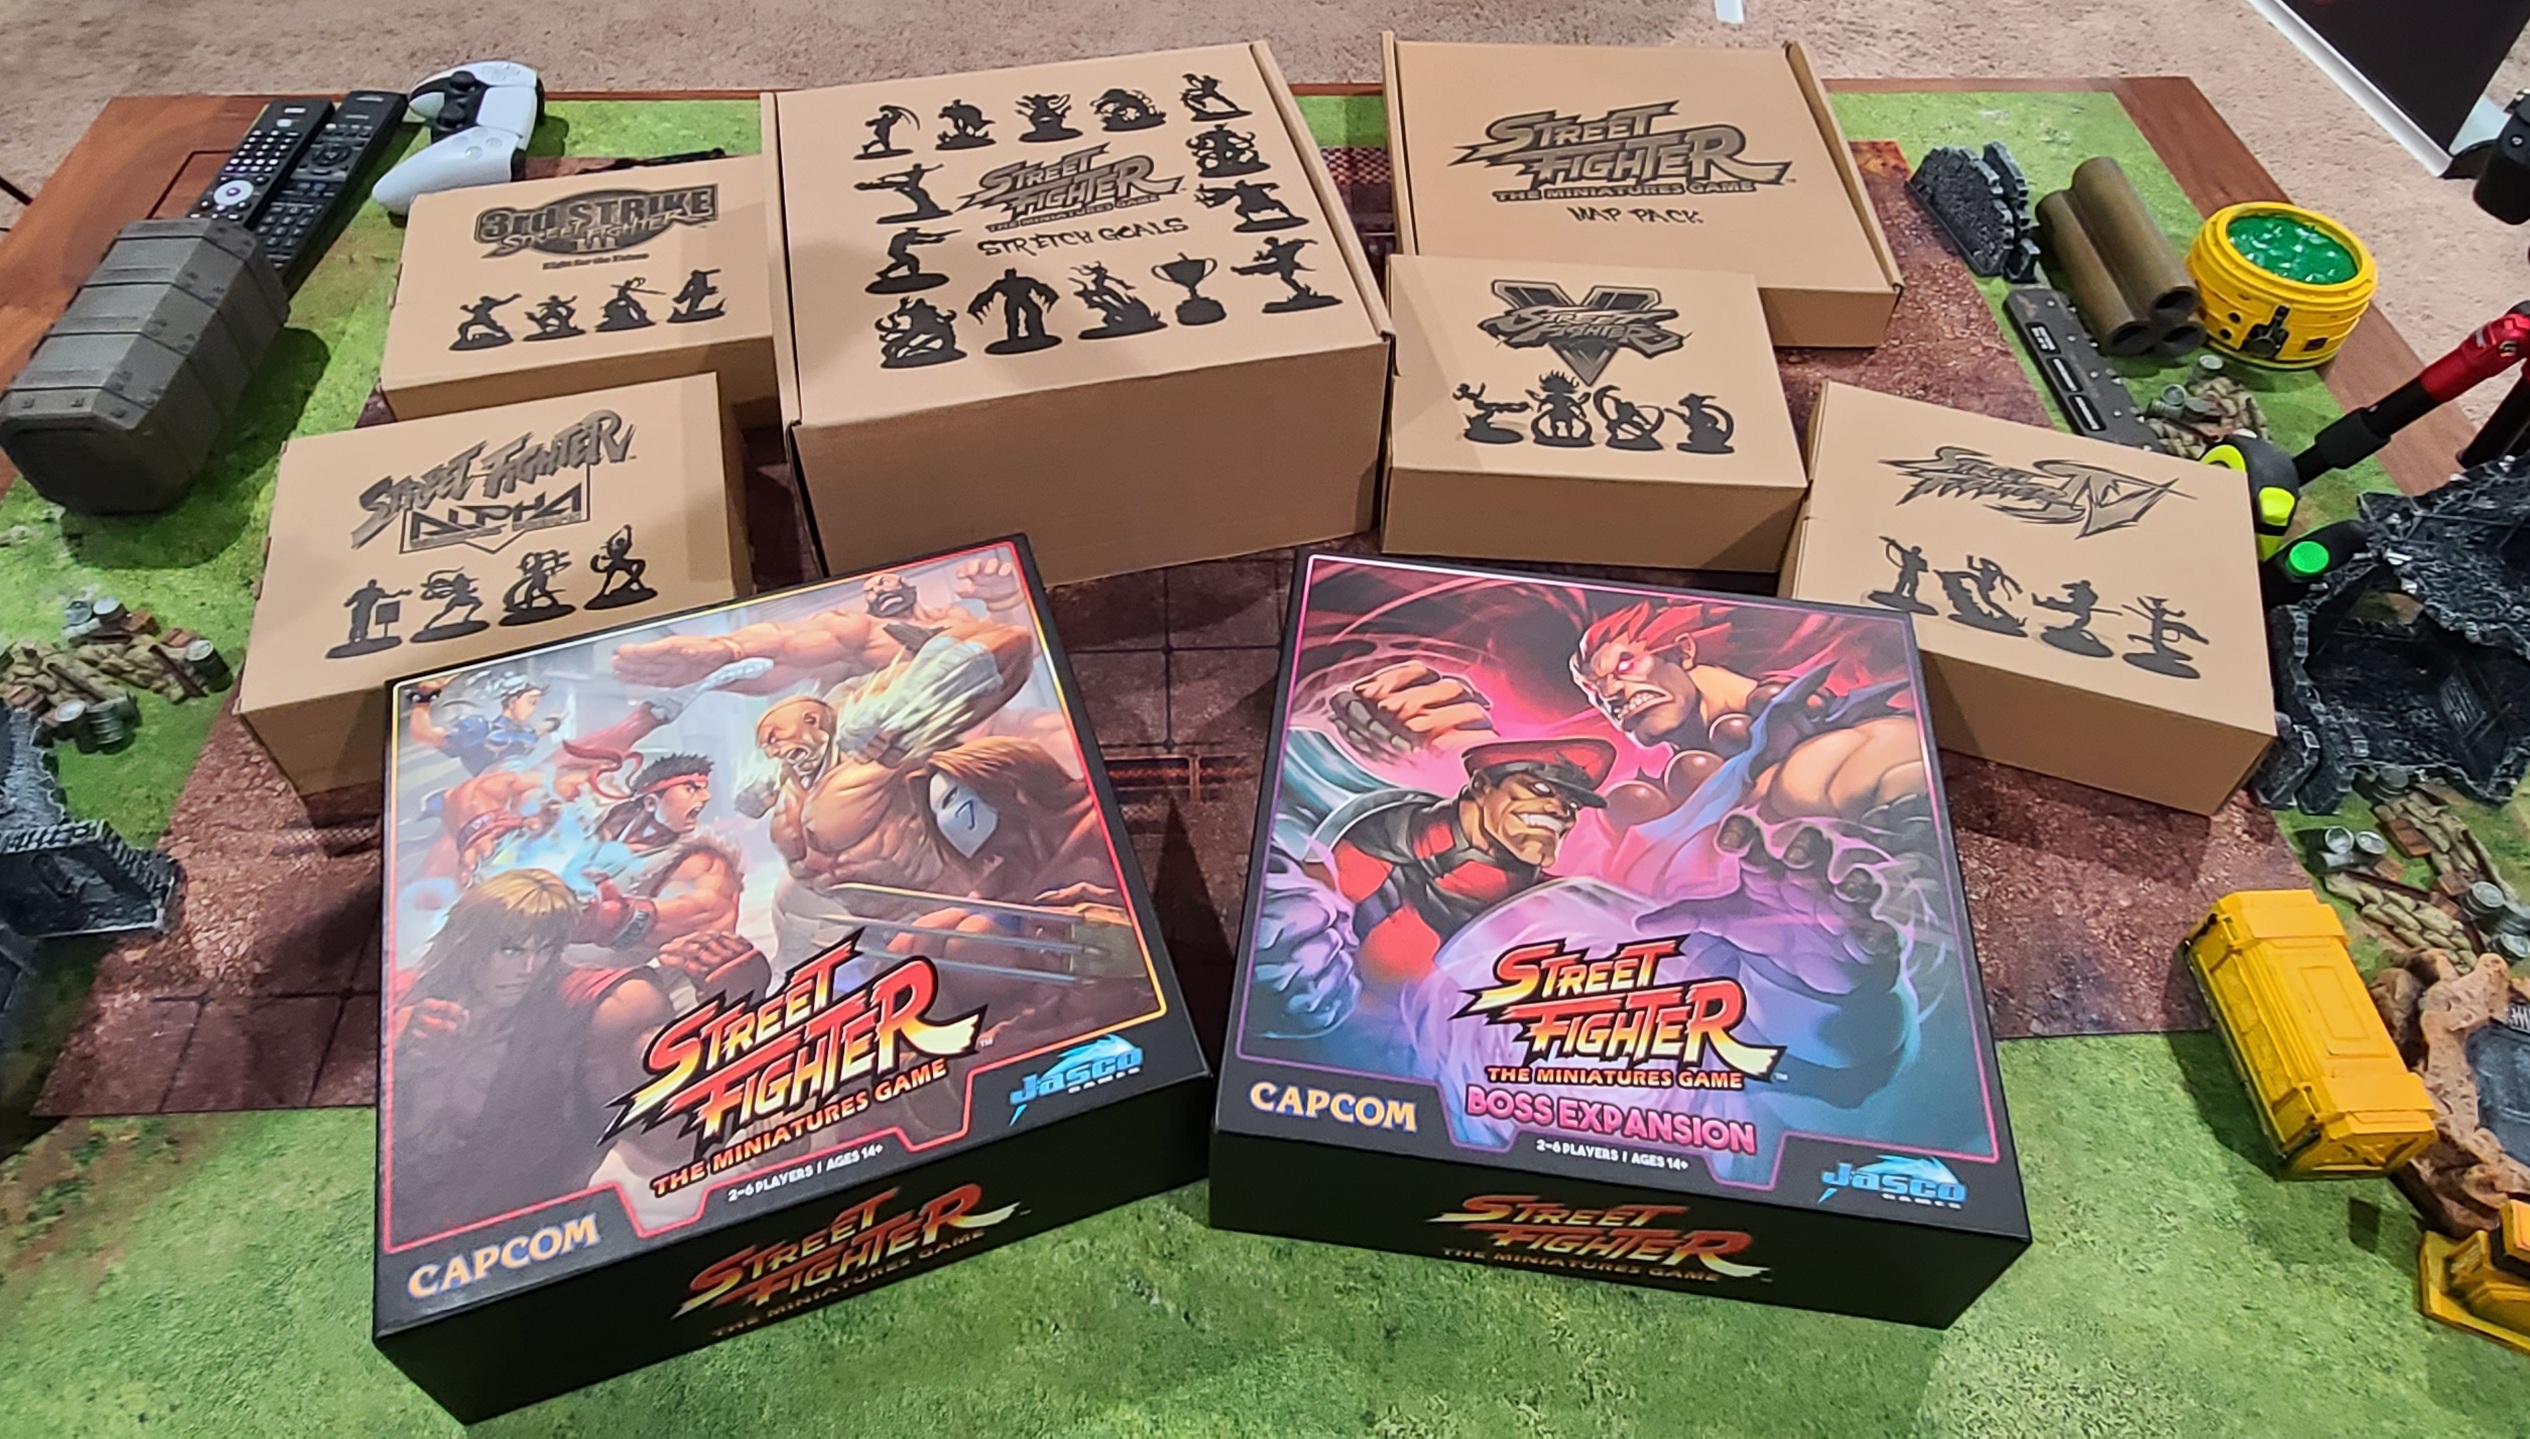 Street Fighter Miniatures Game: Boss Expansion